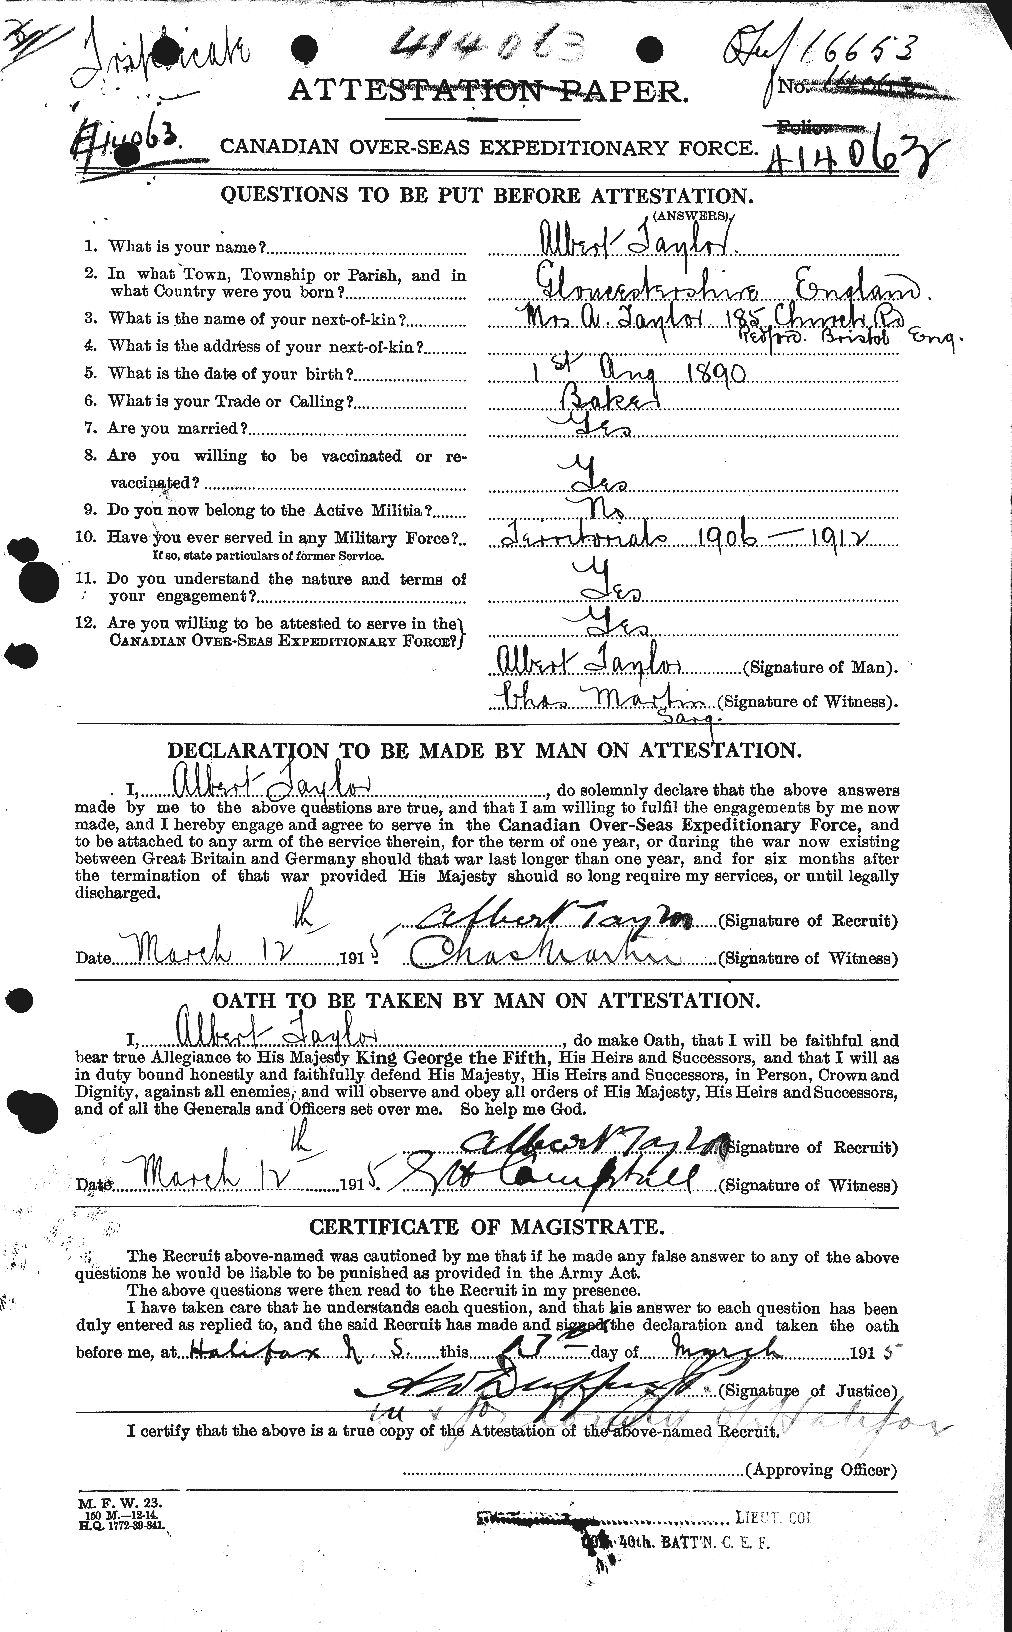 Personnel Records of the First World War - CEF 626103a